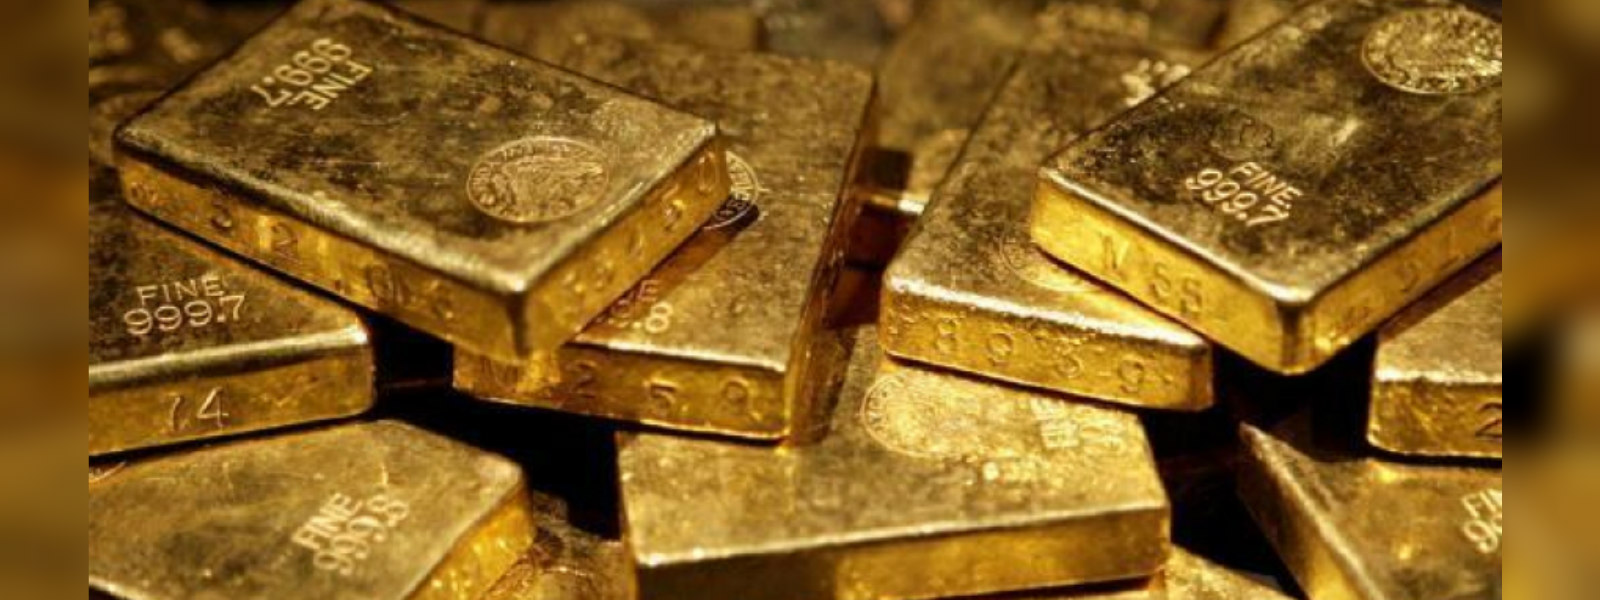 SL Navy arrests 3 with Gold worth Rs. 48 Mn 